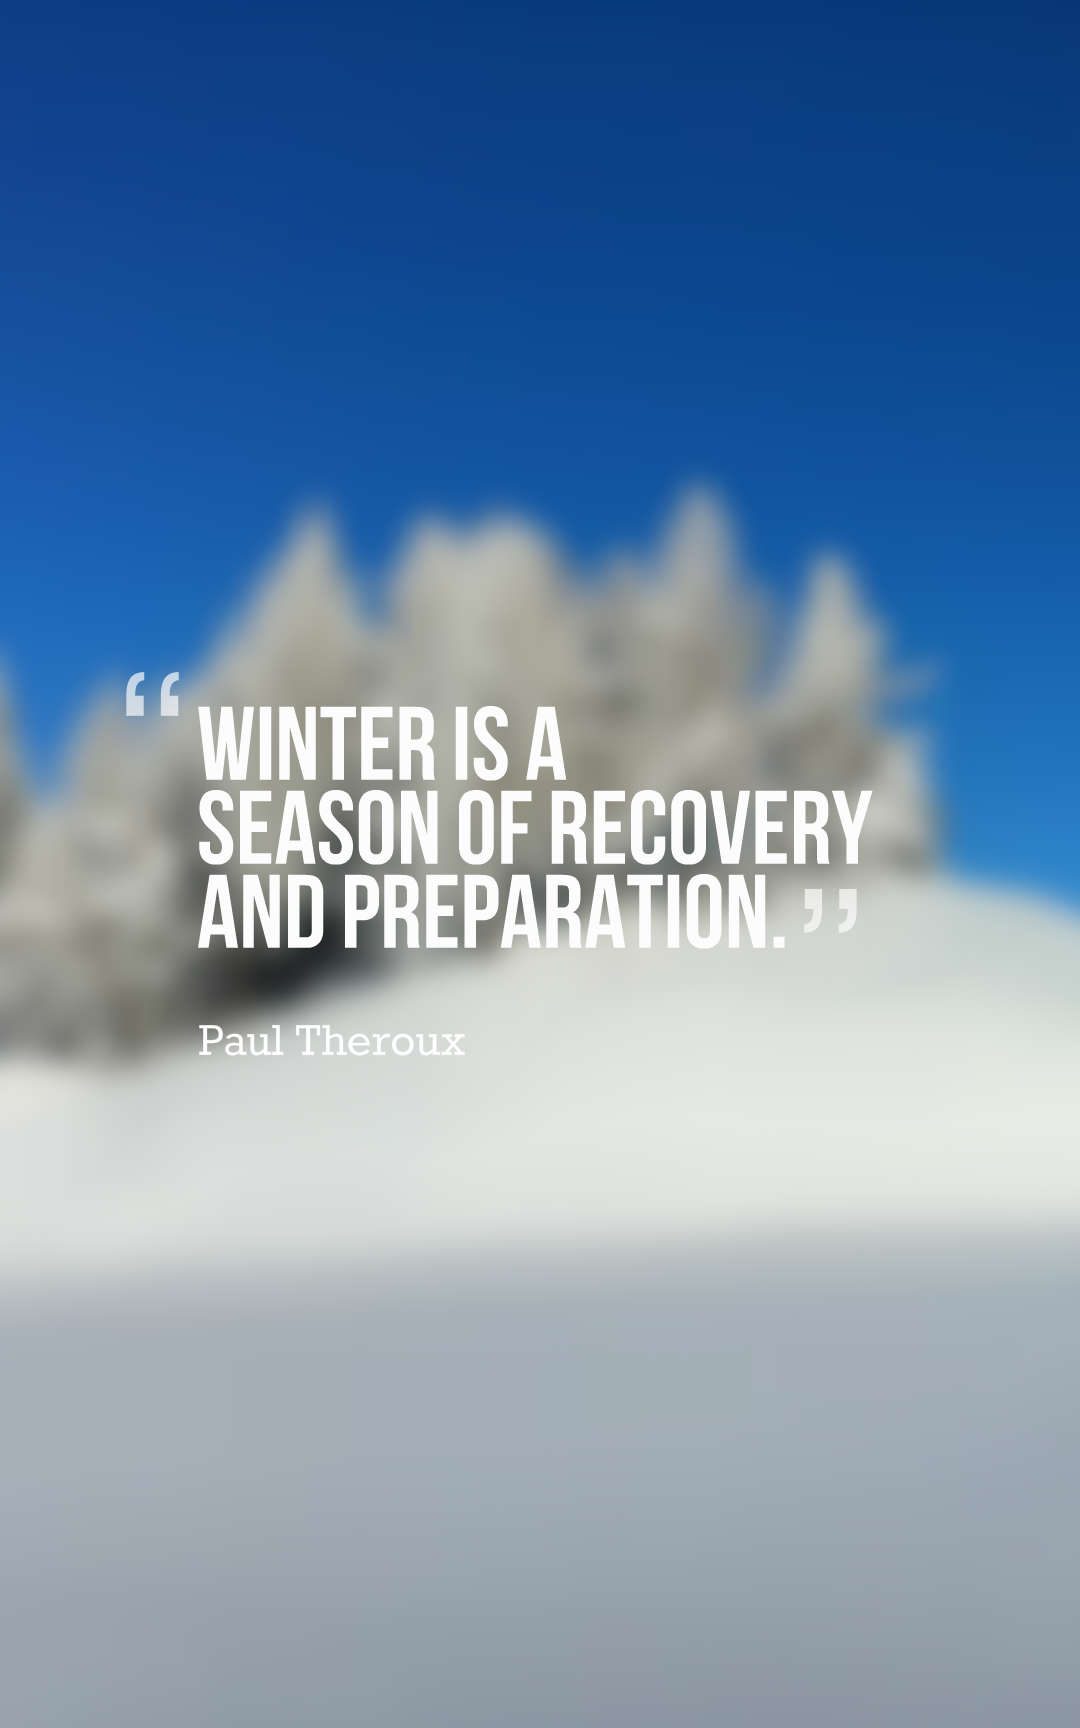 Winter is a season of recovery and preparation.